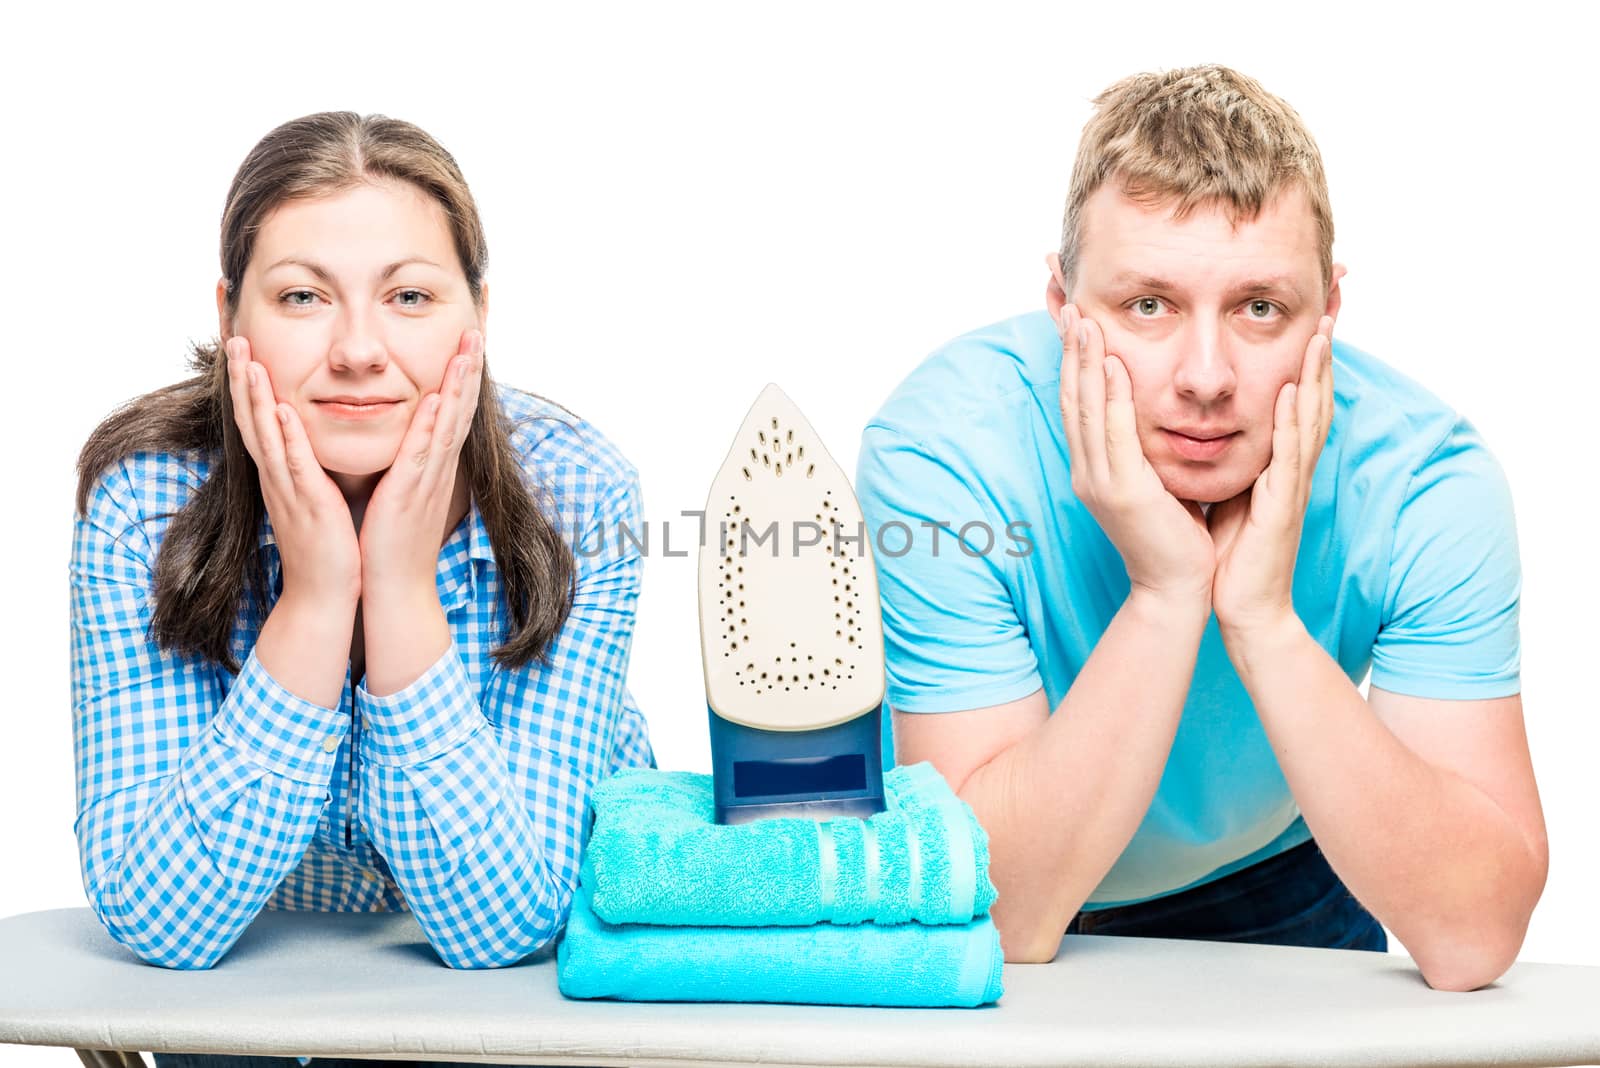 husband and wife posing on ironing board with iron, shooting on white background